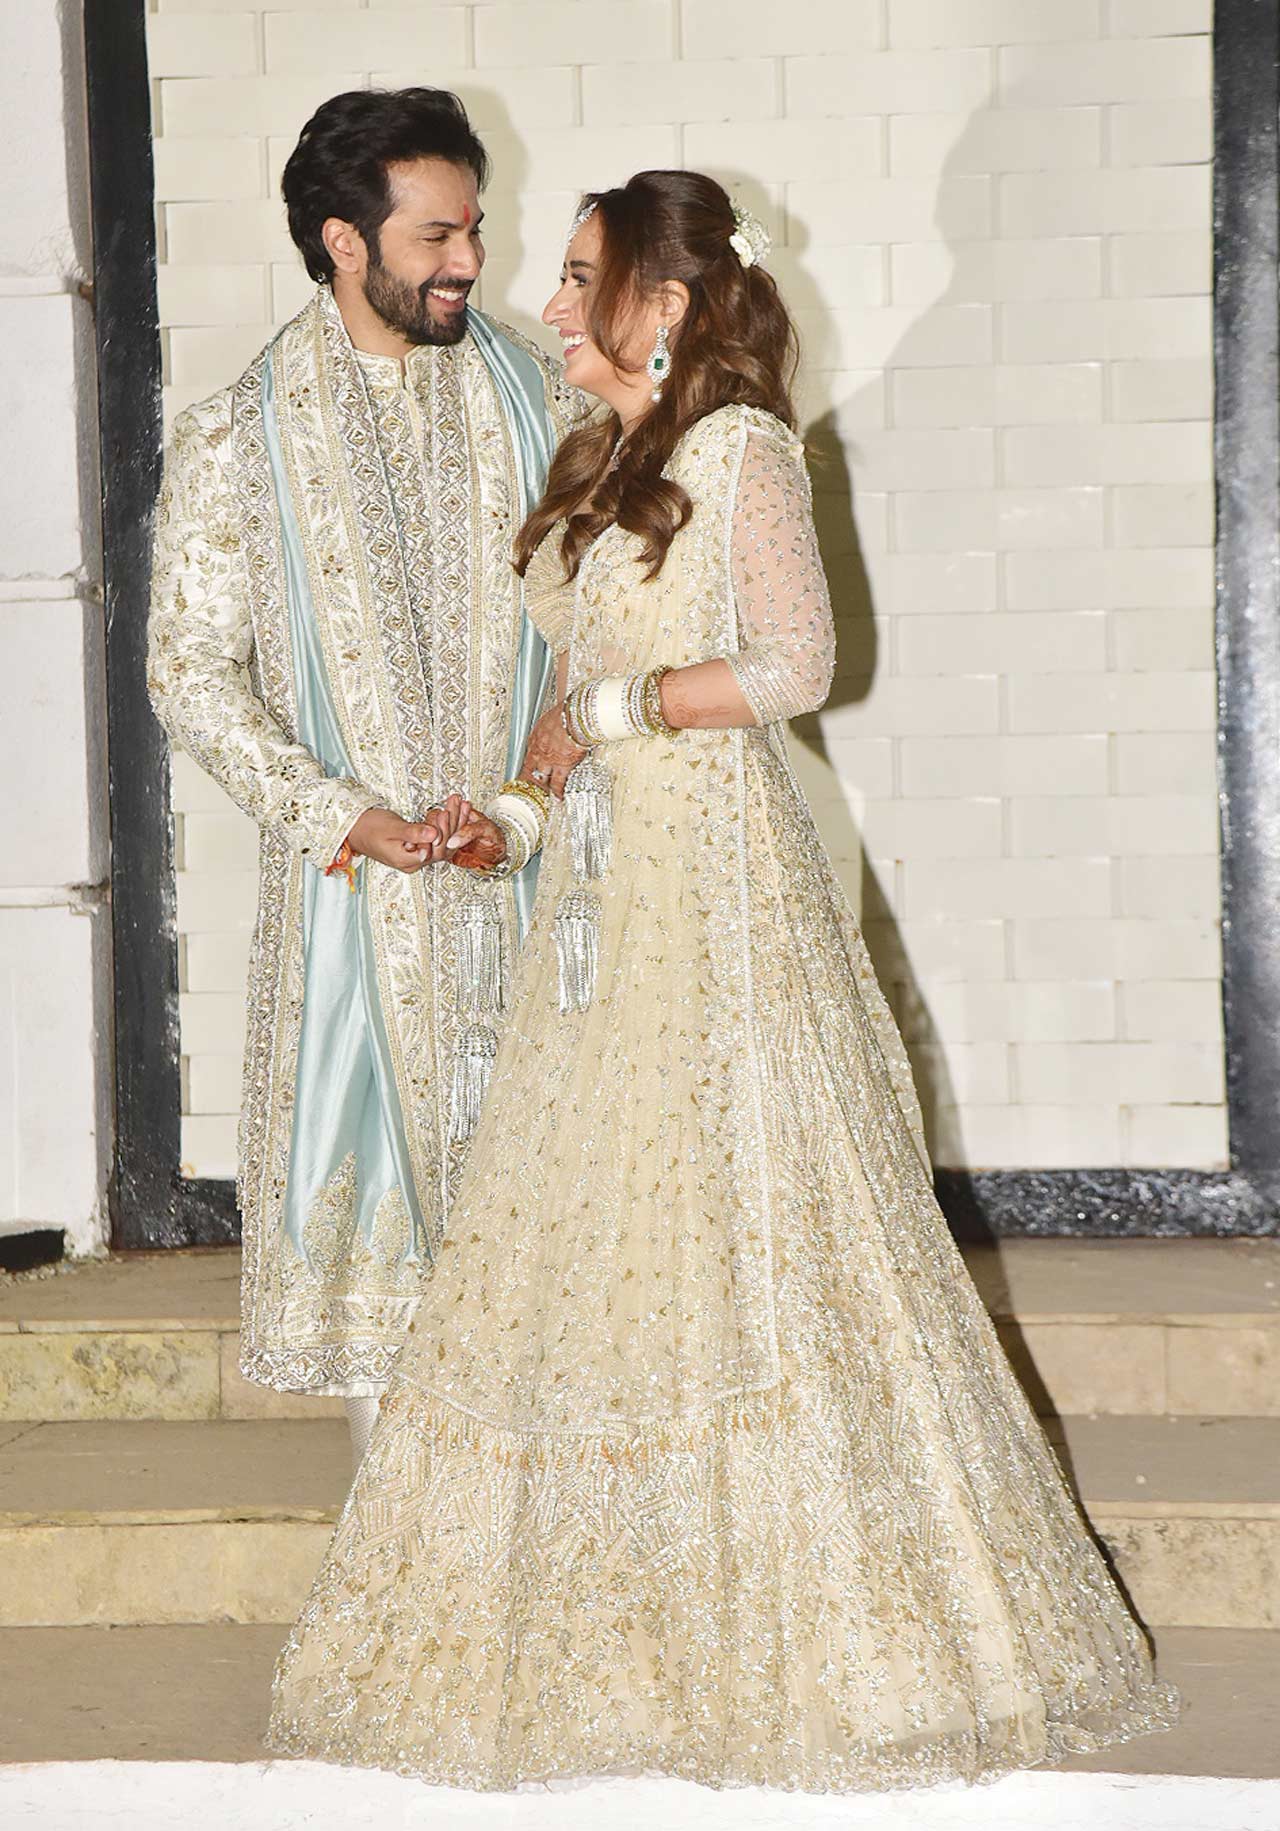 Isn't their love story just out of a fairy tale? We wish the duo a happy married life!